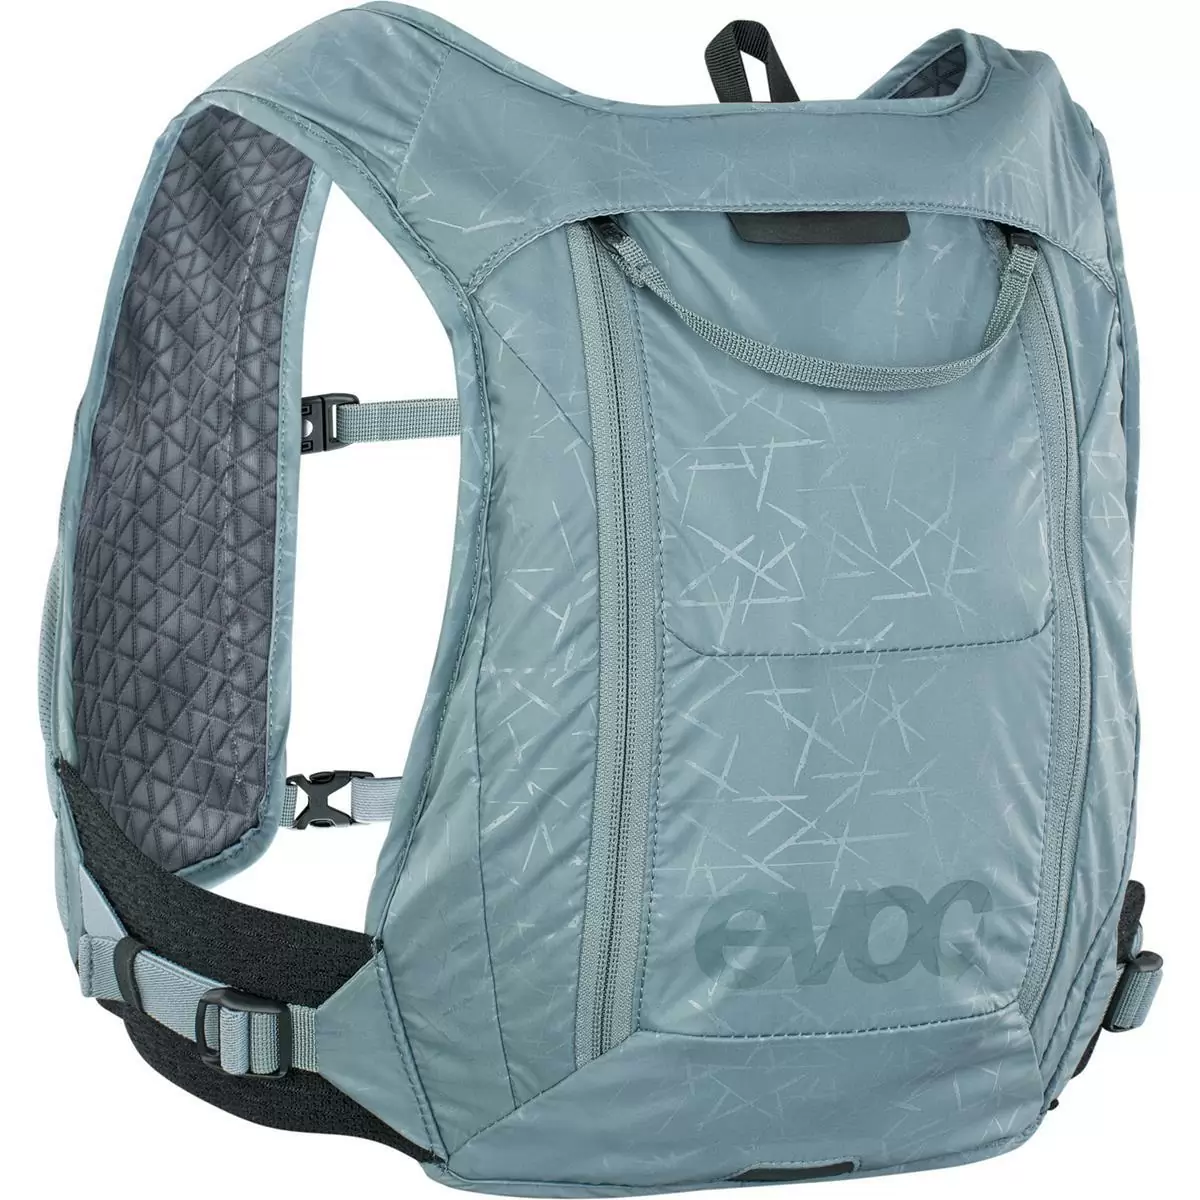 Hydro Pro 1.5 + 1.5 liter hydration pack Steel - image